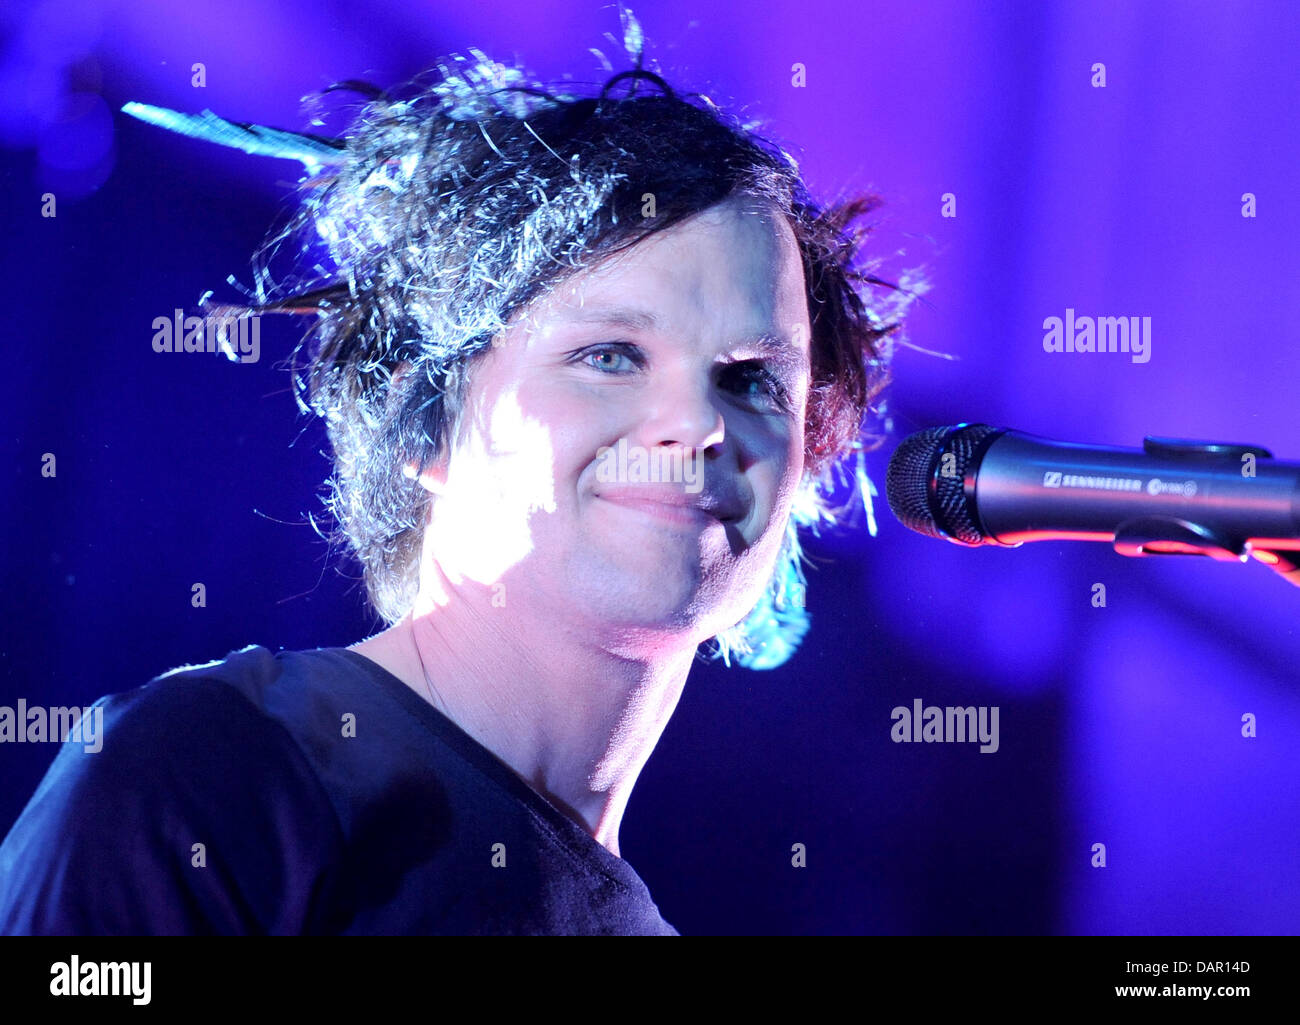 Finnish singer Lauri Ylonen, also known as the lead singer of the Finnish band 'The Rasmus' performs on stage at the Kesselhaus concert venue during the Berlin Music Week - 'Your voice against poverty' in Berlin, Germany, 7 September 2011. Musicians from around the world are showcaing their musical talents in small, off-stage performances. Photo: Britta Pedersen Stock Photo